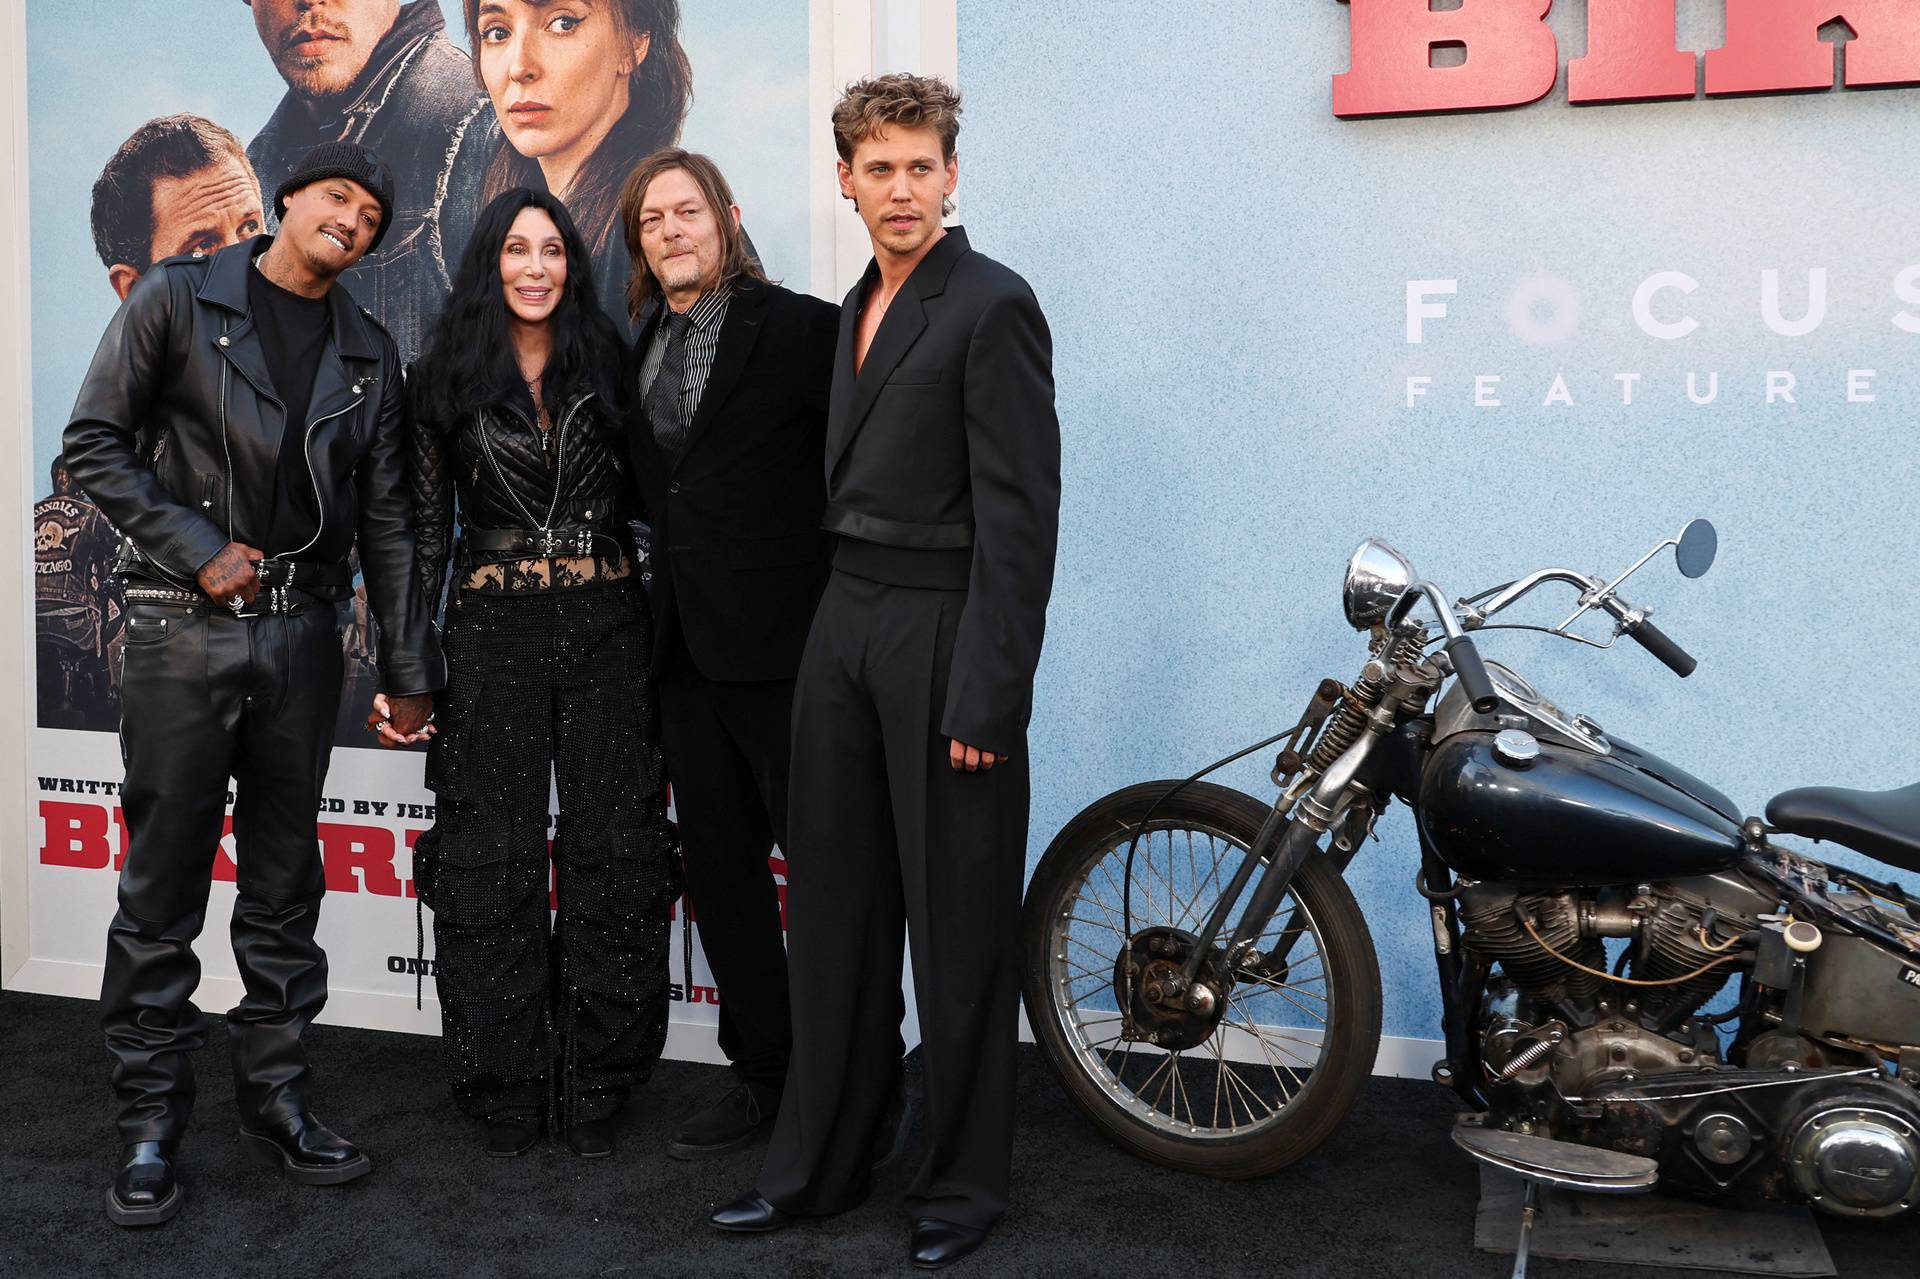 Los Angeles premiere of "The Bikeriders" at the TCL Chinese Theatre